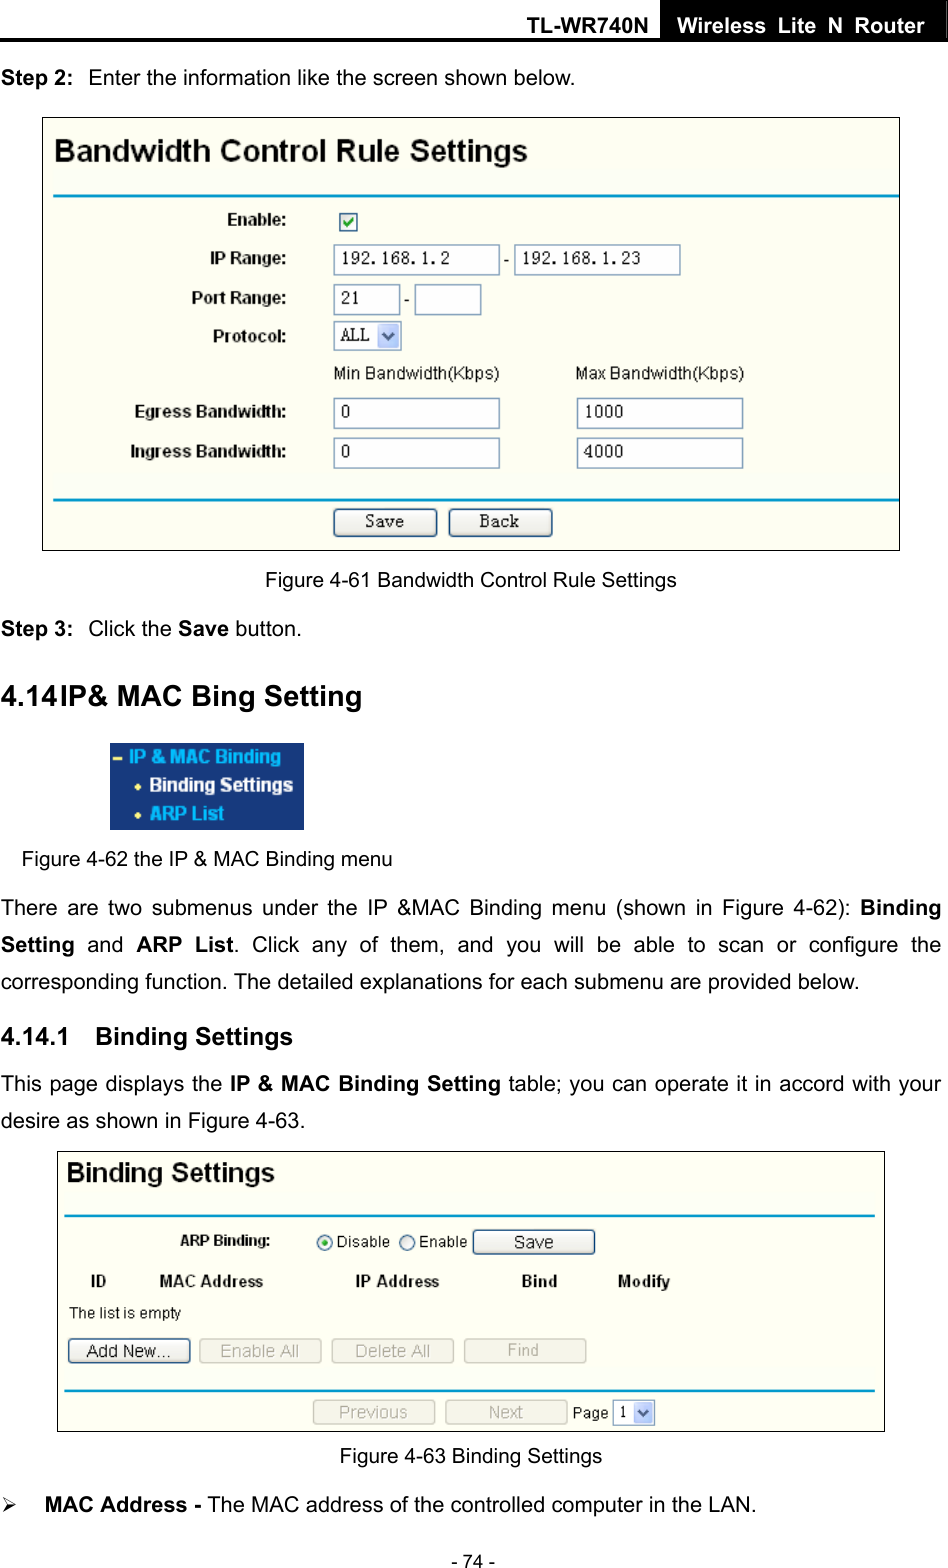 TL-WR740N Wireless Lite N Router  - 74 - Step 2:  Enter the information like the screen shown below.  Figure 4-61 Bandwidth Control Rule Settings Step 3:  Click the Save button. 4.14 IP&amp; MAC Bing Setting  Figure 4-62 the IP &amp; MAC Binding menu There are two submenus under the IP &amp;MAC Binding menu (shown in Figure 4-62): Binding Setting  and ARP List. Click any of them, and you will be able to scan or configure the corresponding function. The detailed explanations for each submenu are provided below. 4.14.1  Binding Settings This page displays the IP &amp; MAC Binding Setting table; you can operate it in accord with your desire as shown in Figure 4-63.    Figure 4-63 Binding Settings ¾ MAC Address - The MAC address of the controlled computer in the LAN.   